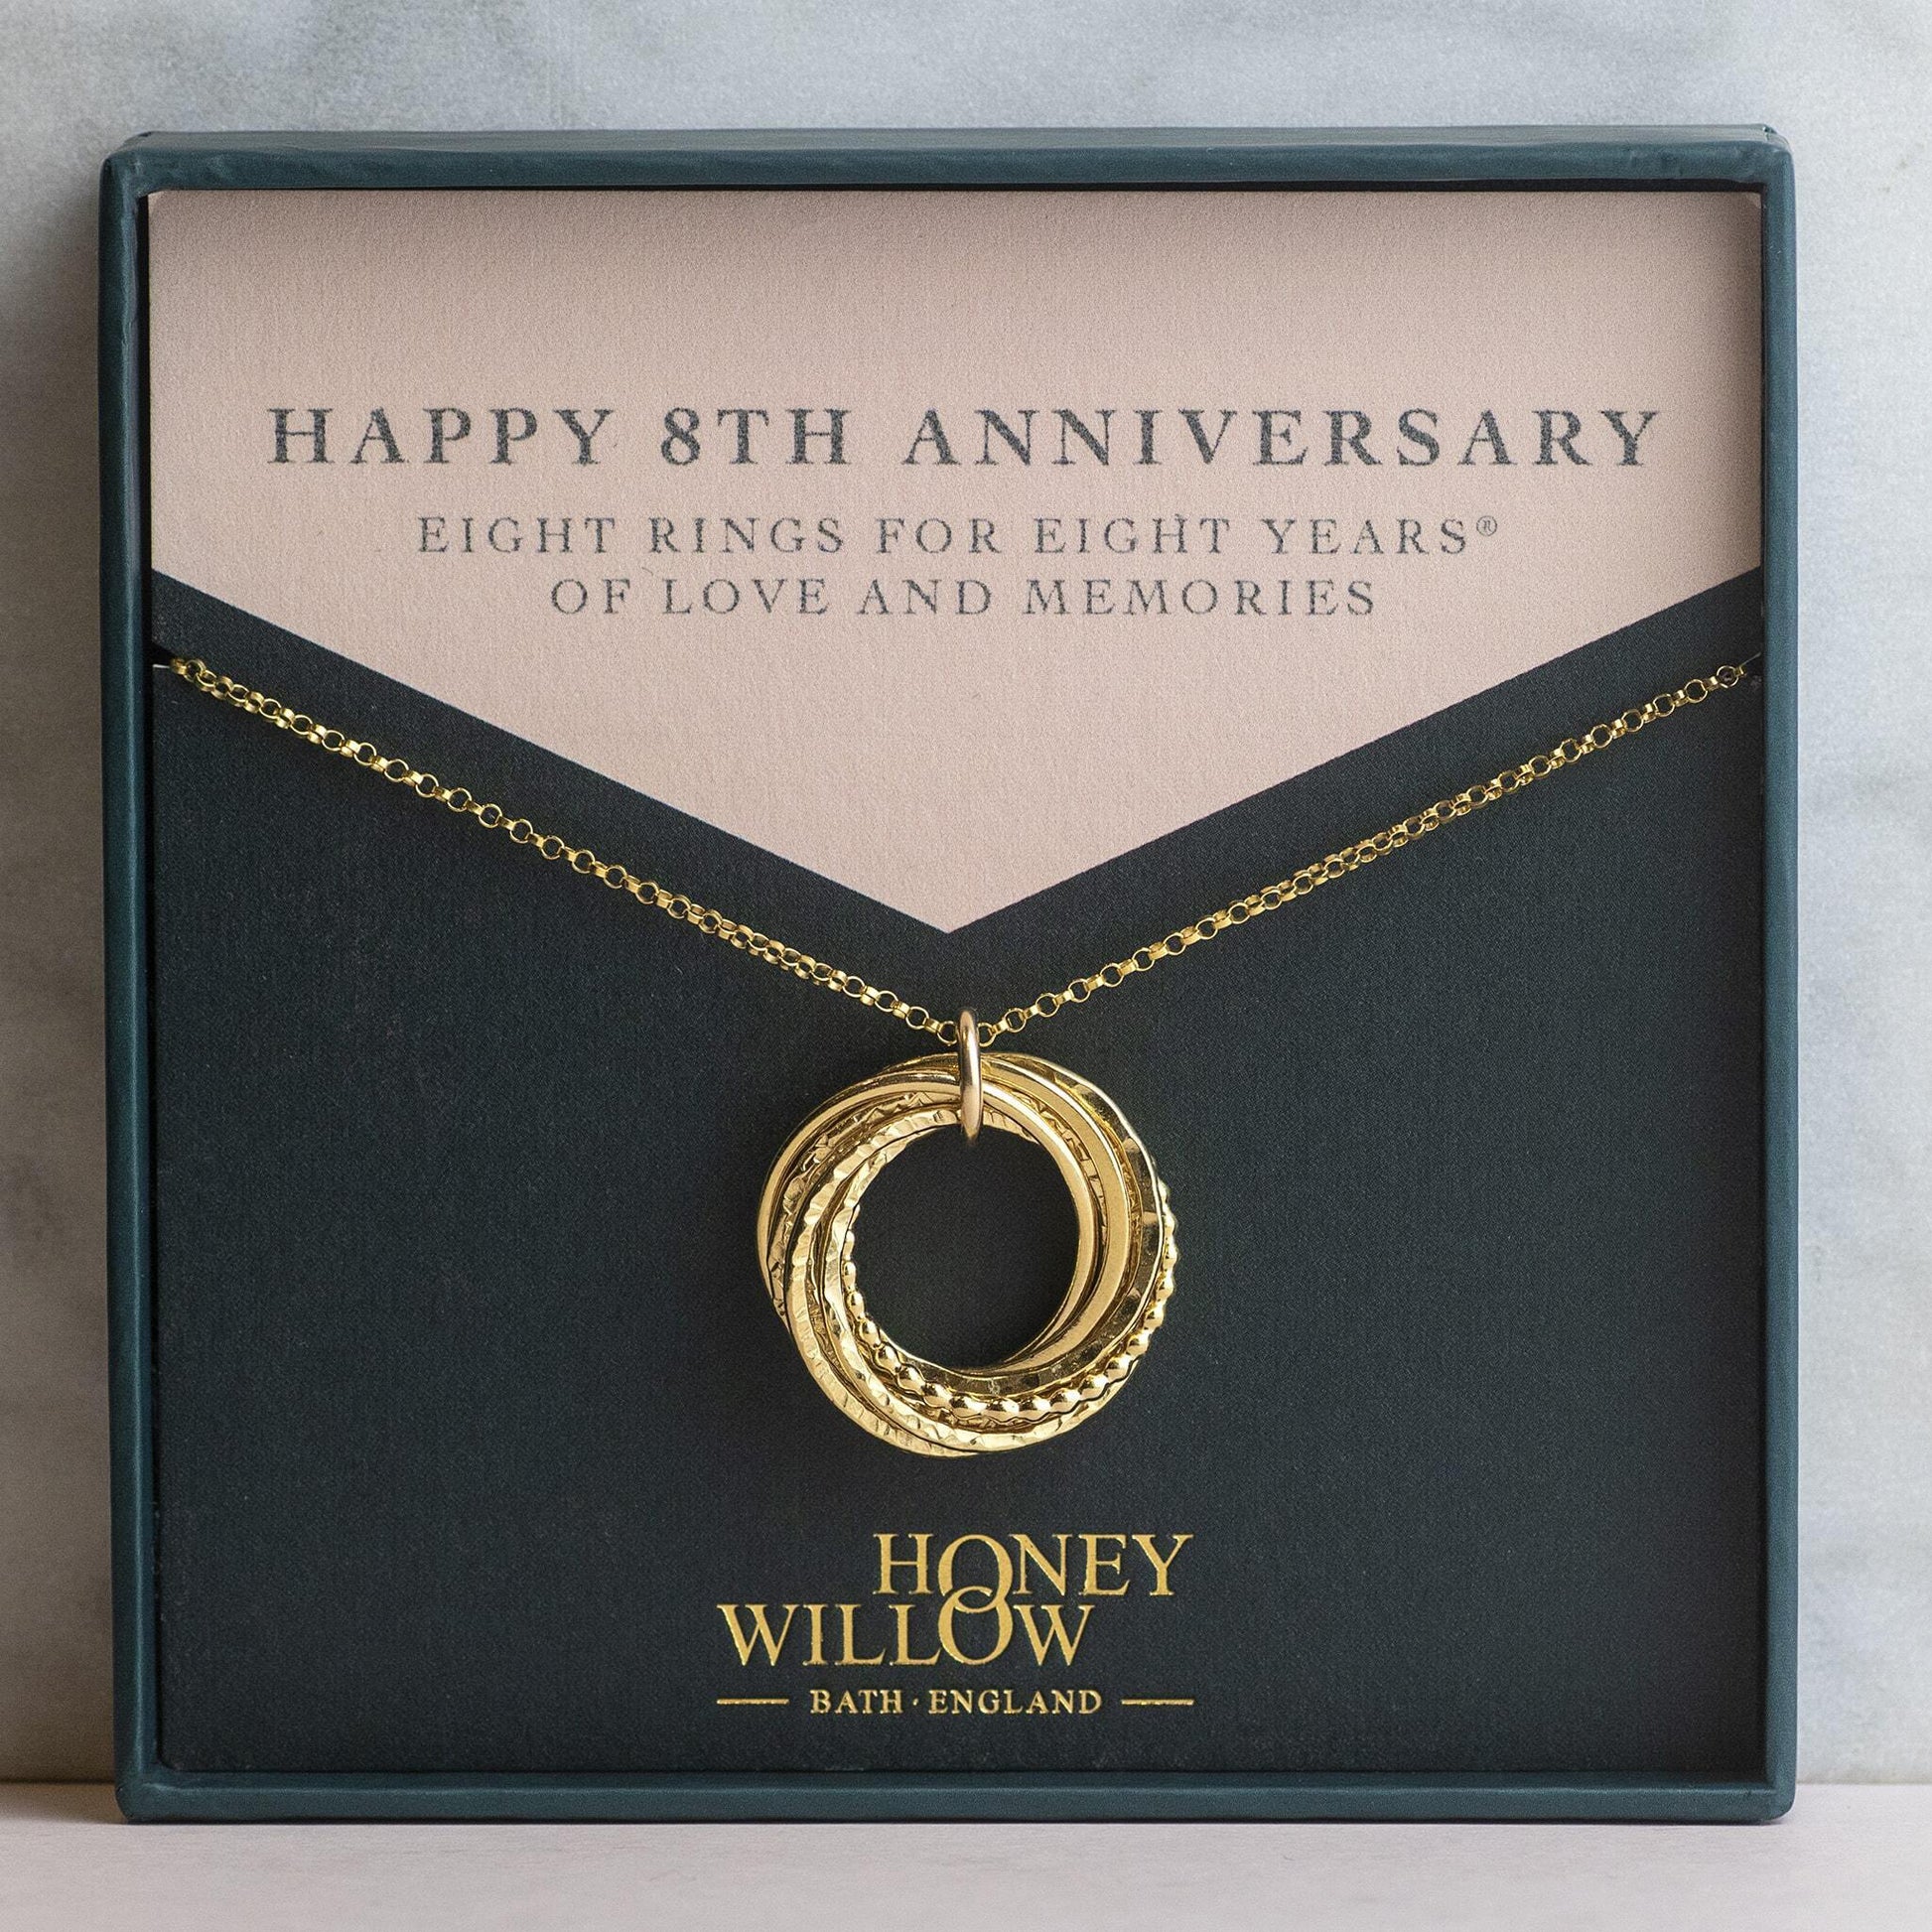 8th Anniversary Necklace - Gold - The Original 8 Rings for 8 Years Necklace